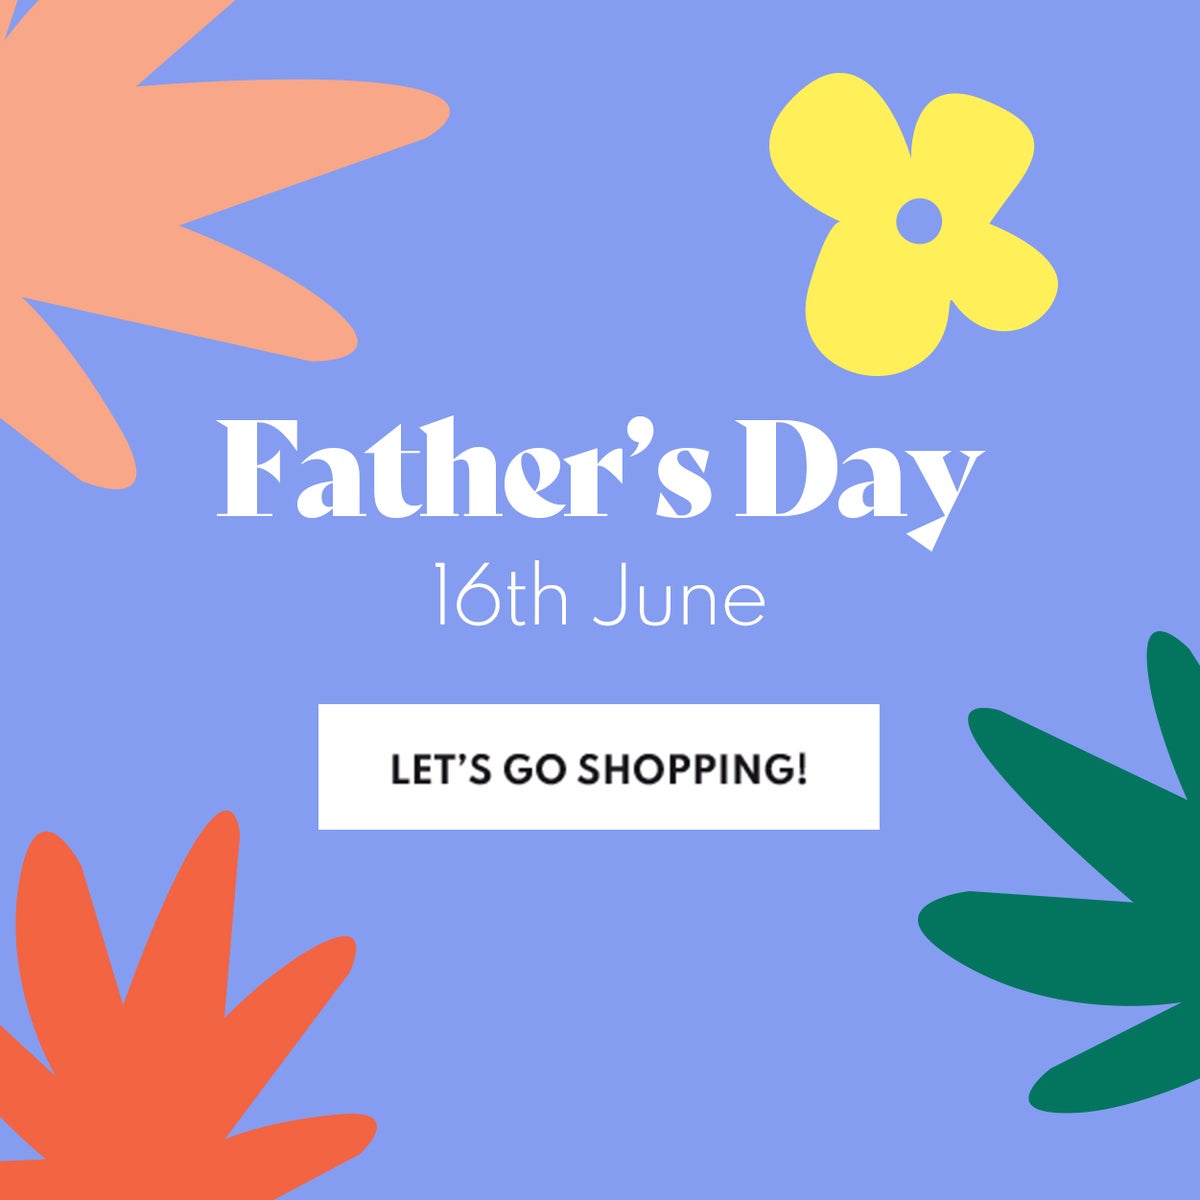 Father's Day 16th June Let's Go Shopping